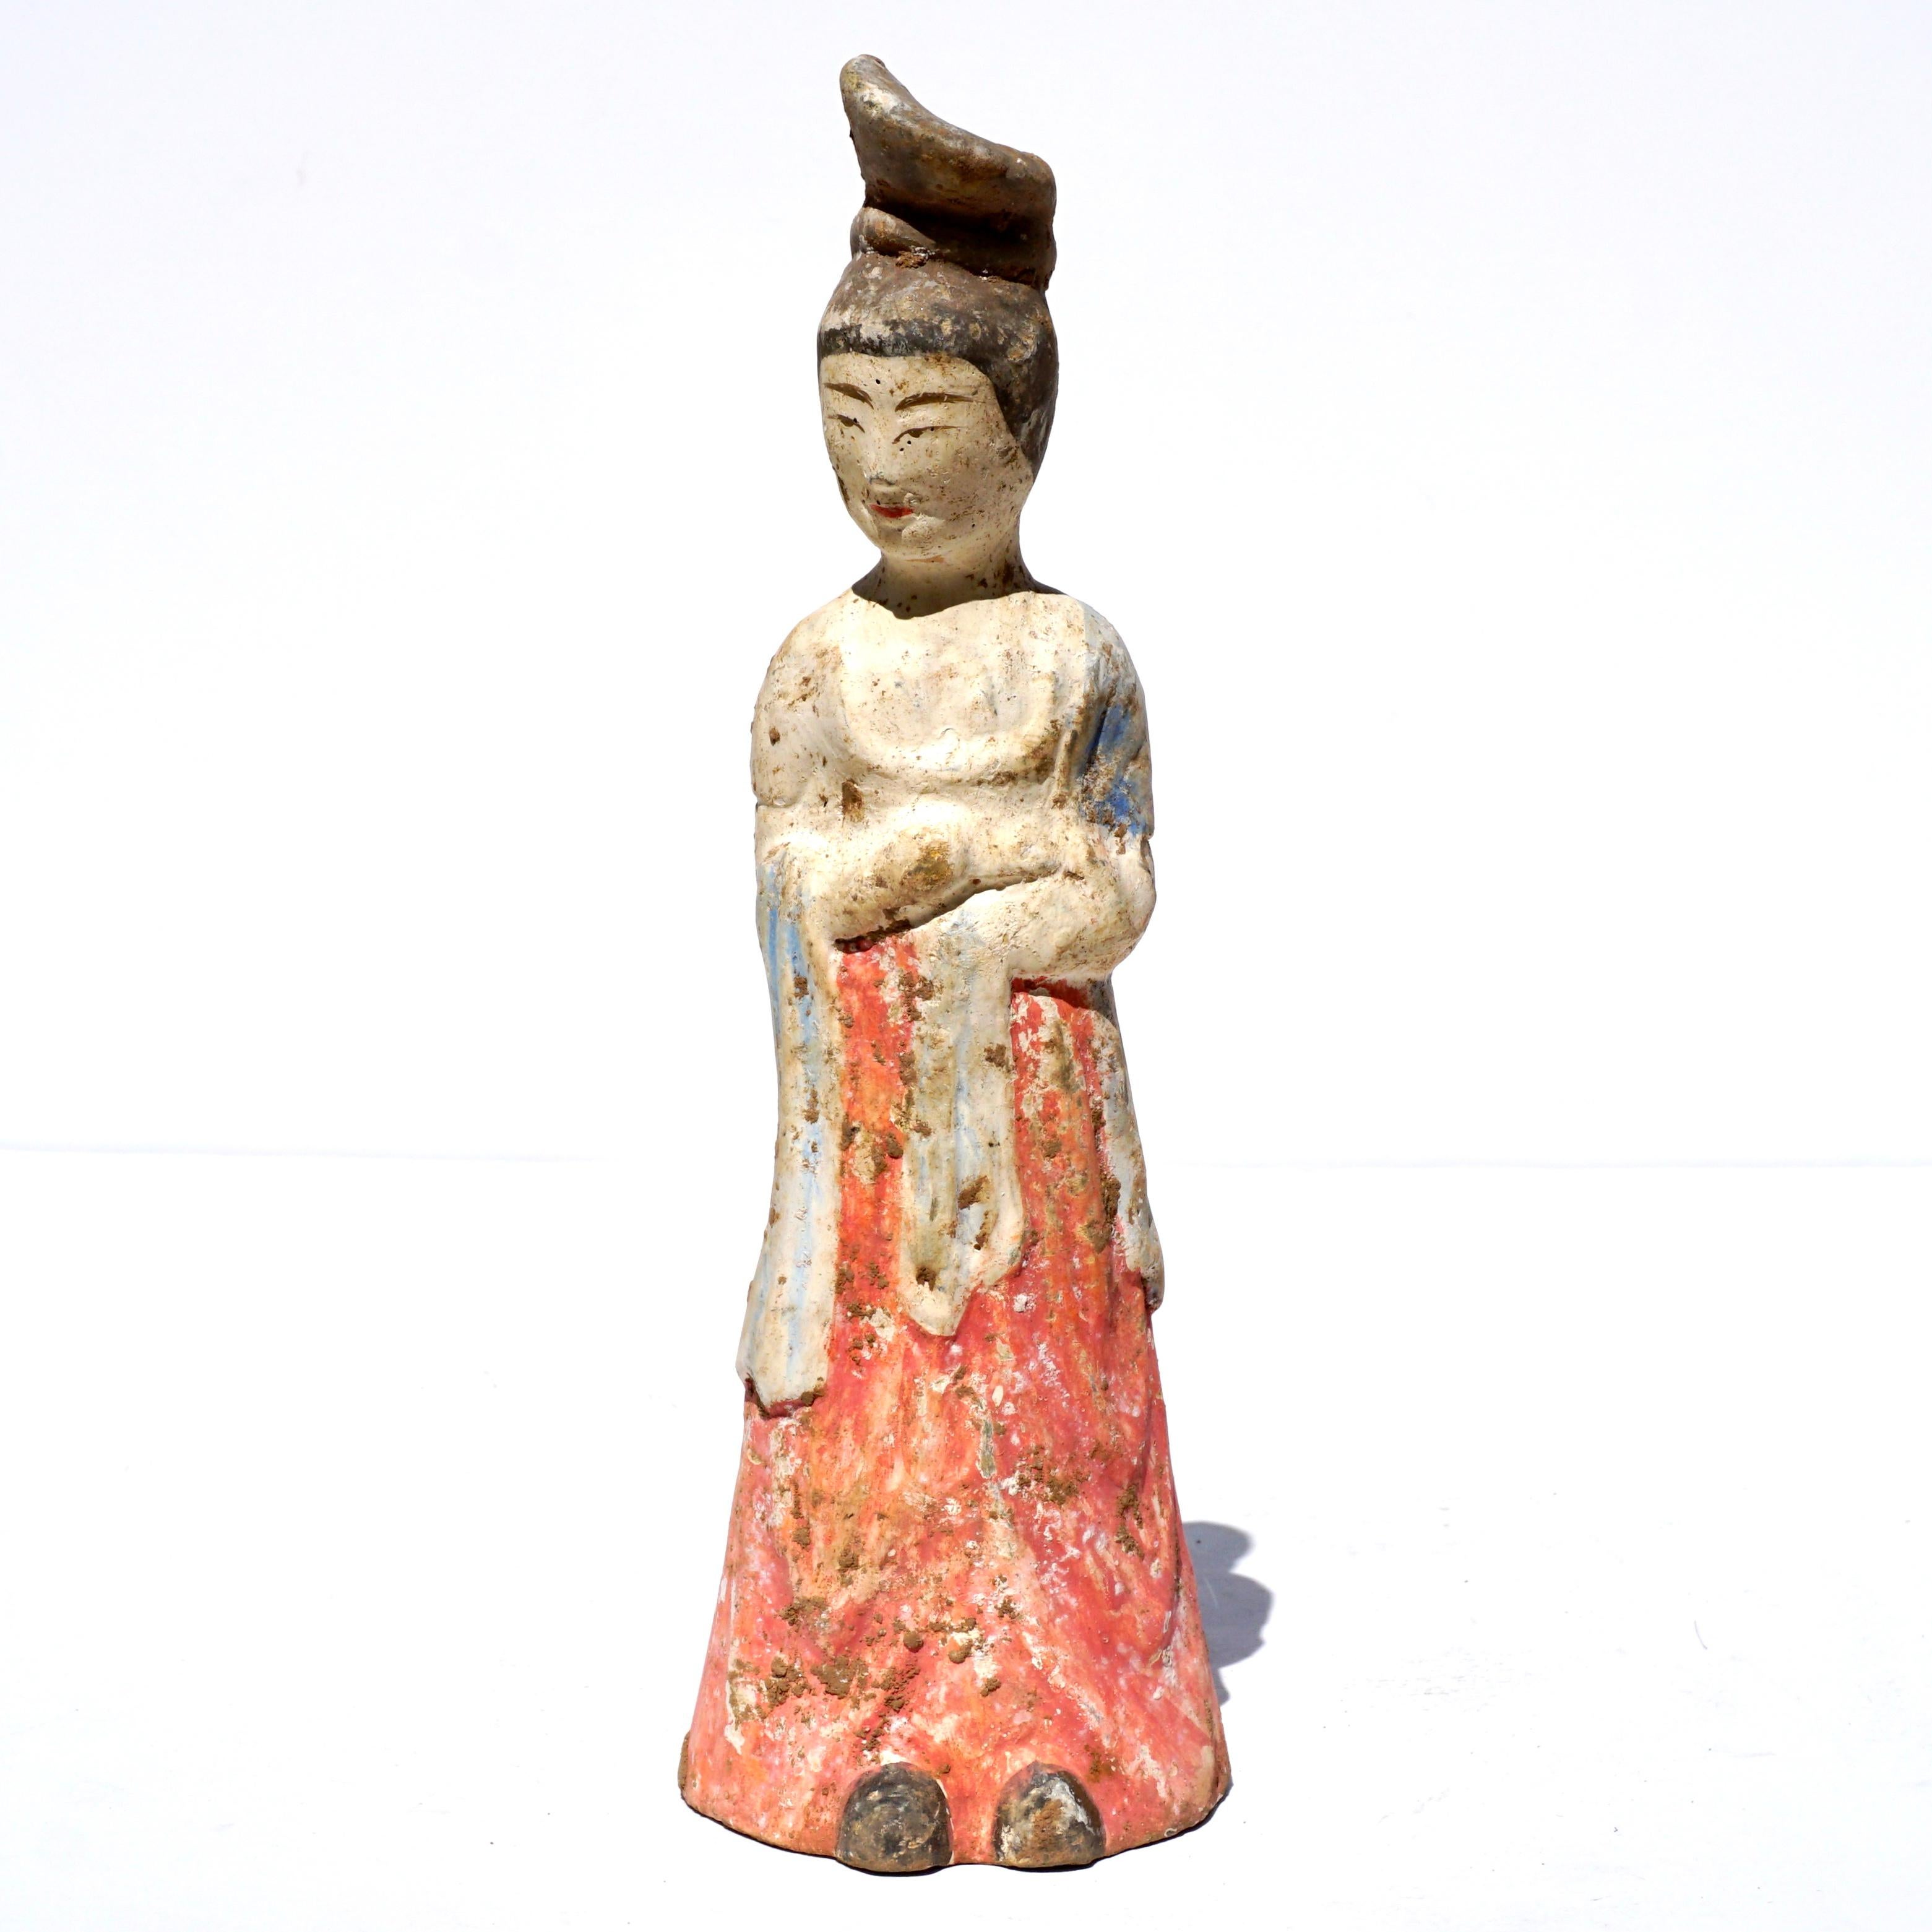 Circa (618-907 AD) A pottery tomb attendant figure in the form of a woman who is wearing a lengthy robe with a red-painted skirt, her robes are painted in beautiful blue pigment, holds her arms together against her chest and displays her smiling